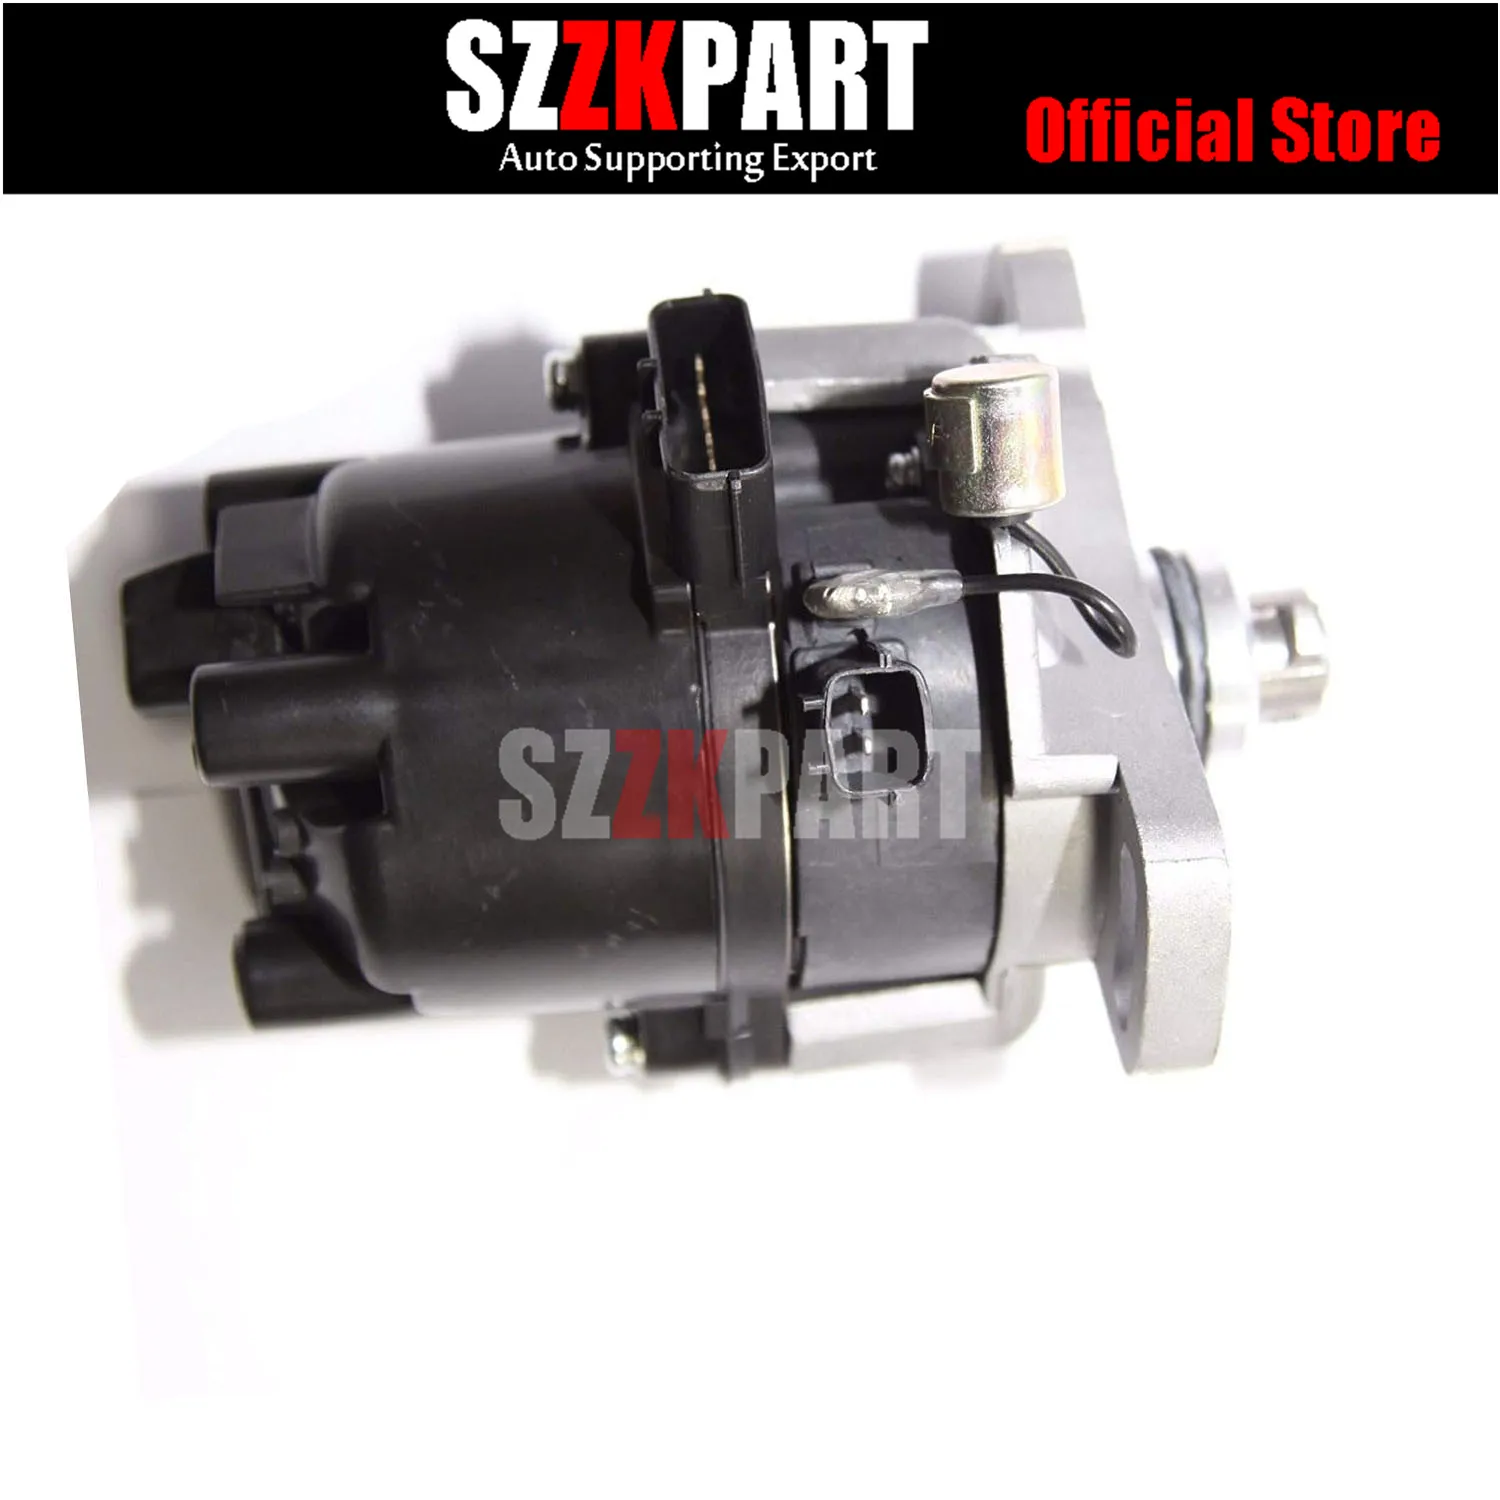 

Refurbished Ignition Distributor For Nissan S-entra 200SX L-ucino G20 OEM 22100-0M810 22100-0M811 T2T57771